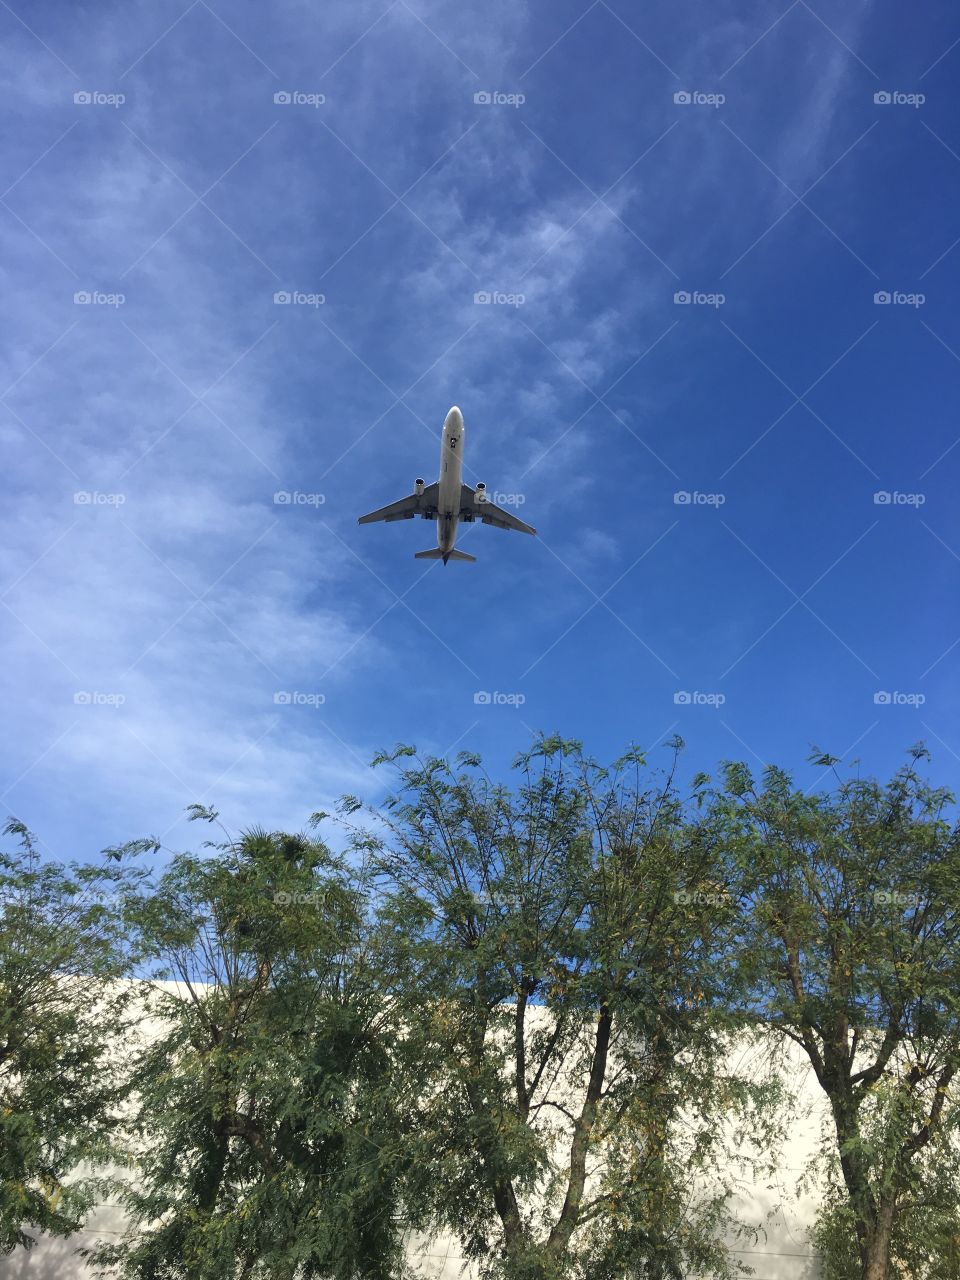 Accidentally caught this plane lol flew right into my shot and created a beautiful mistake 